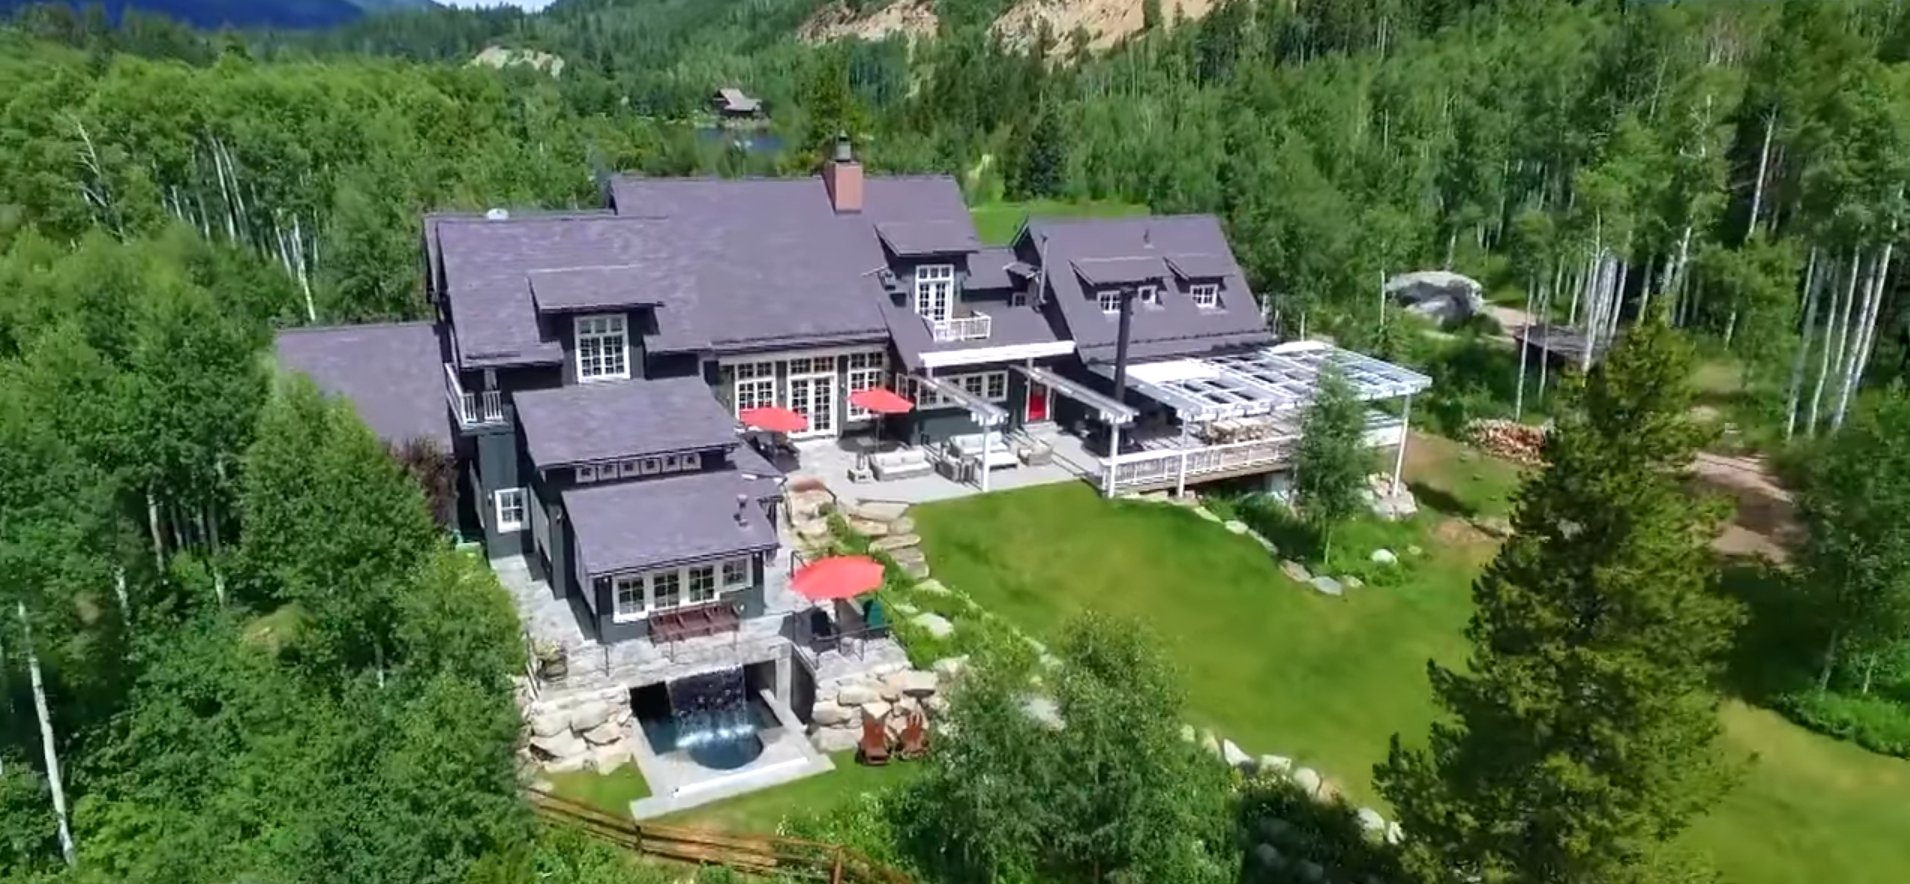 Kevin Costners Anwesen in Aspen, Colorado. | Quelle: Youtube/CNBCMakeIt